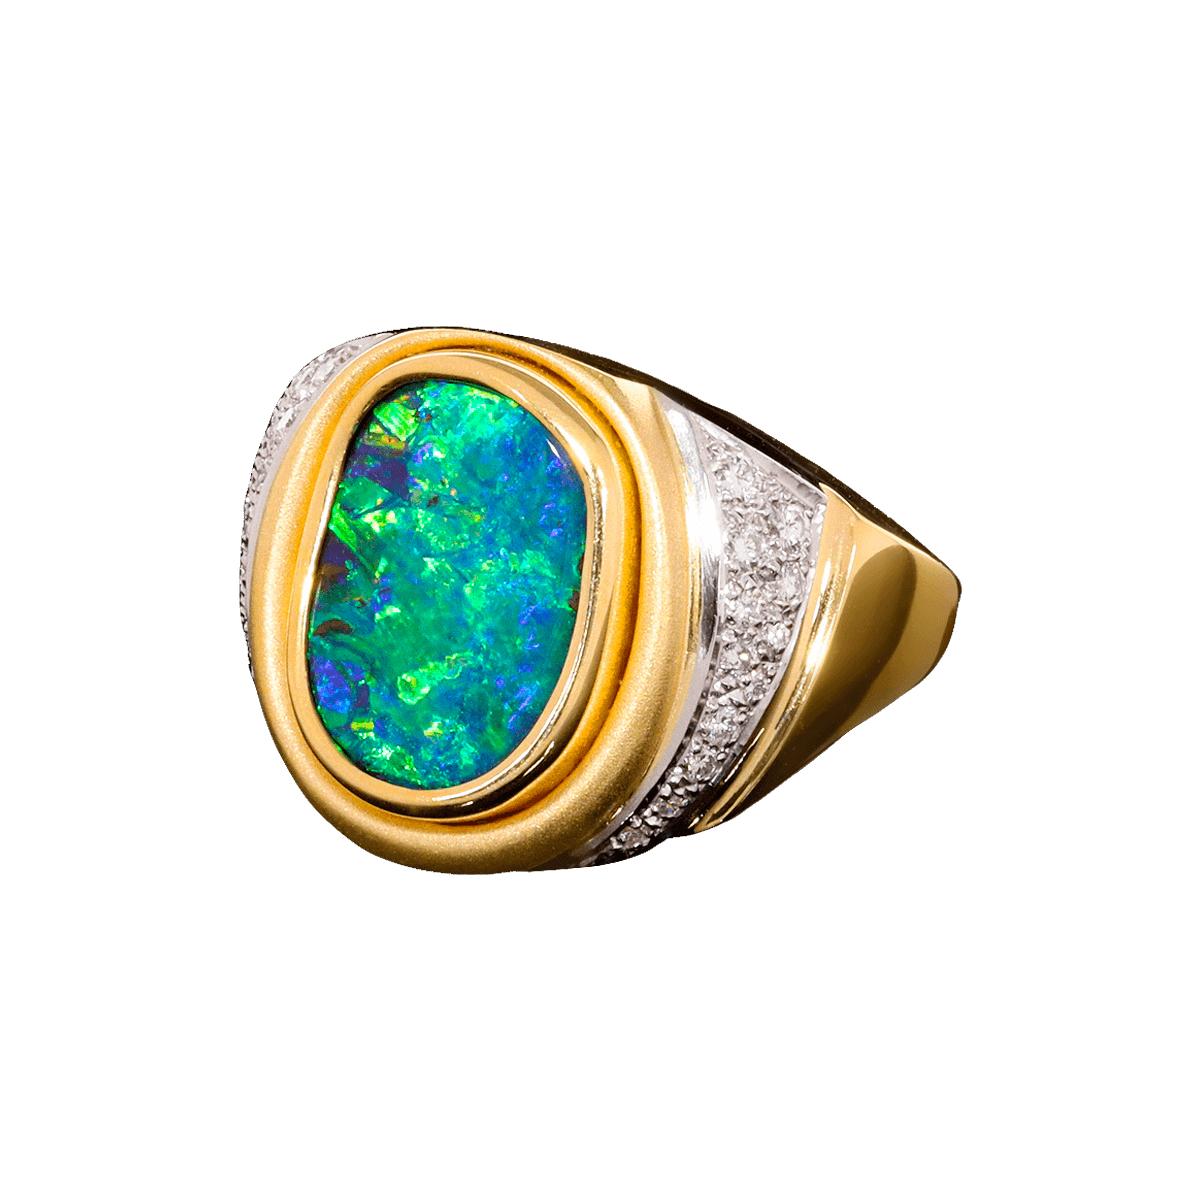 A vacation in the Seychelles that you can wear on your finger. What a stunning ring with a beautiful boulder opal that will bring you back to a tropical holiday every time you look upon it.

Surrounded with high jewellery grade brilliant white